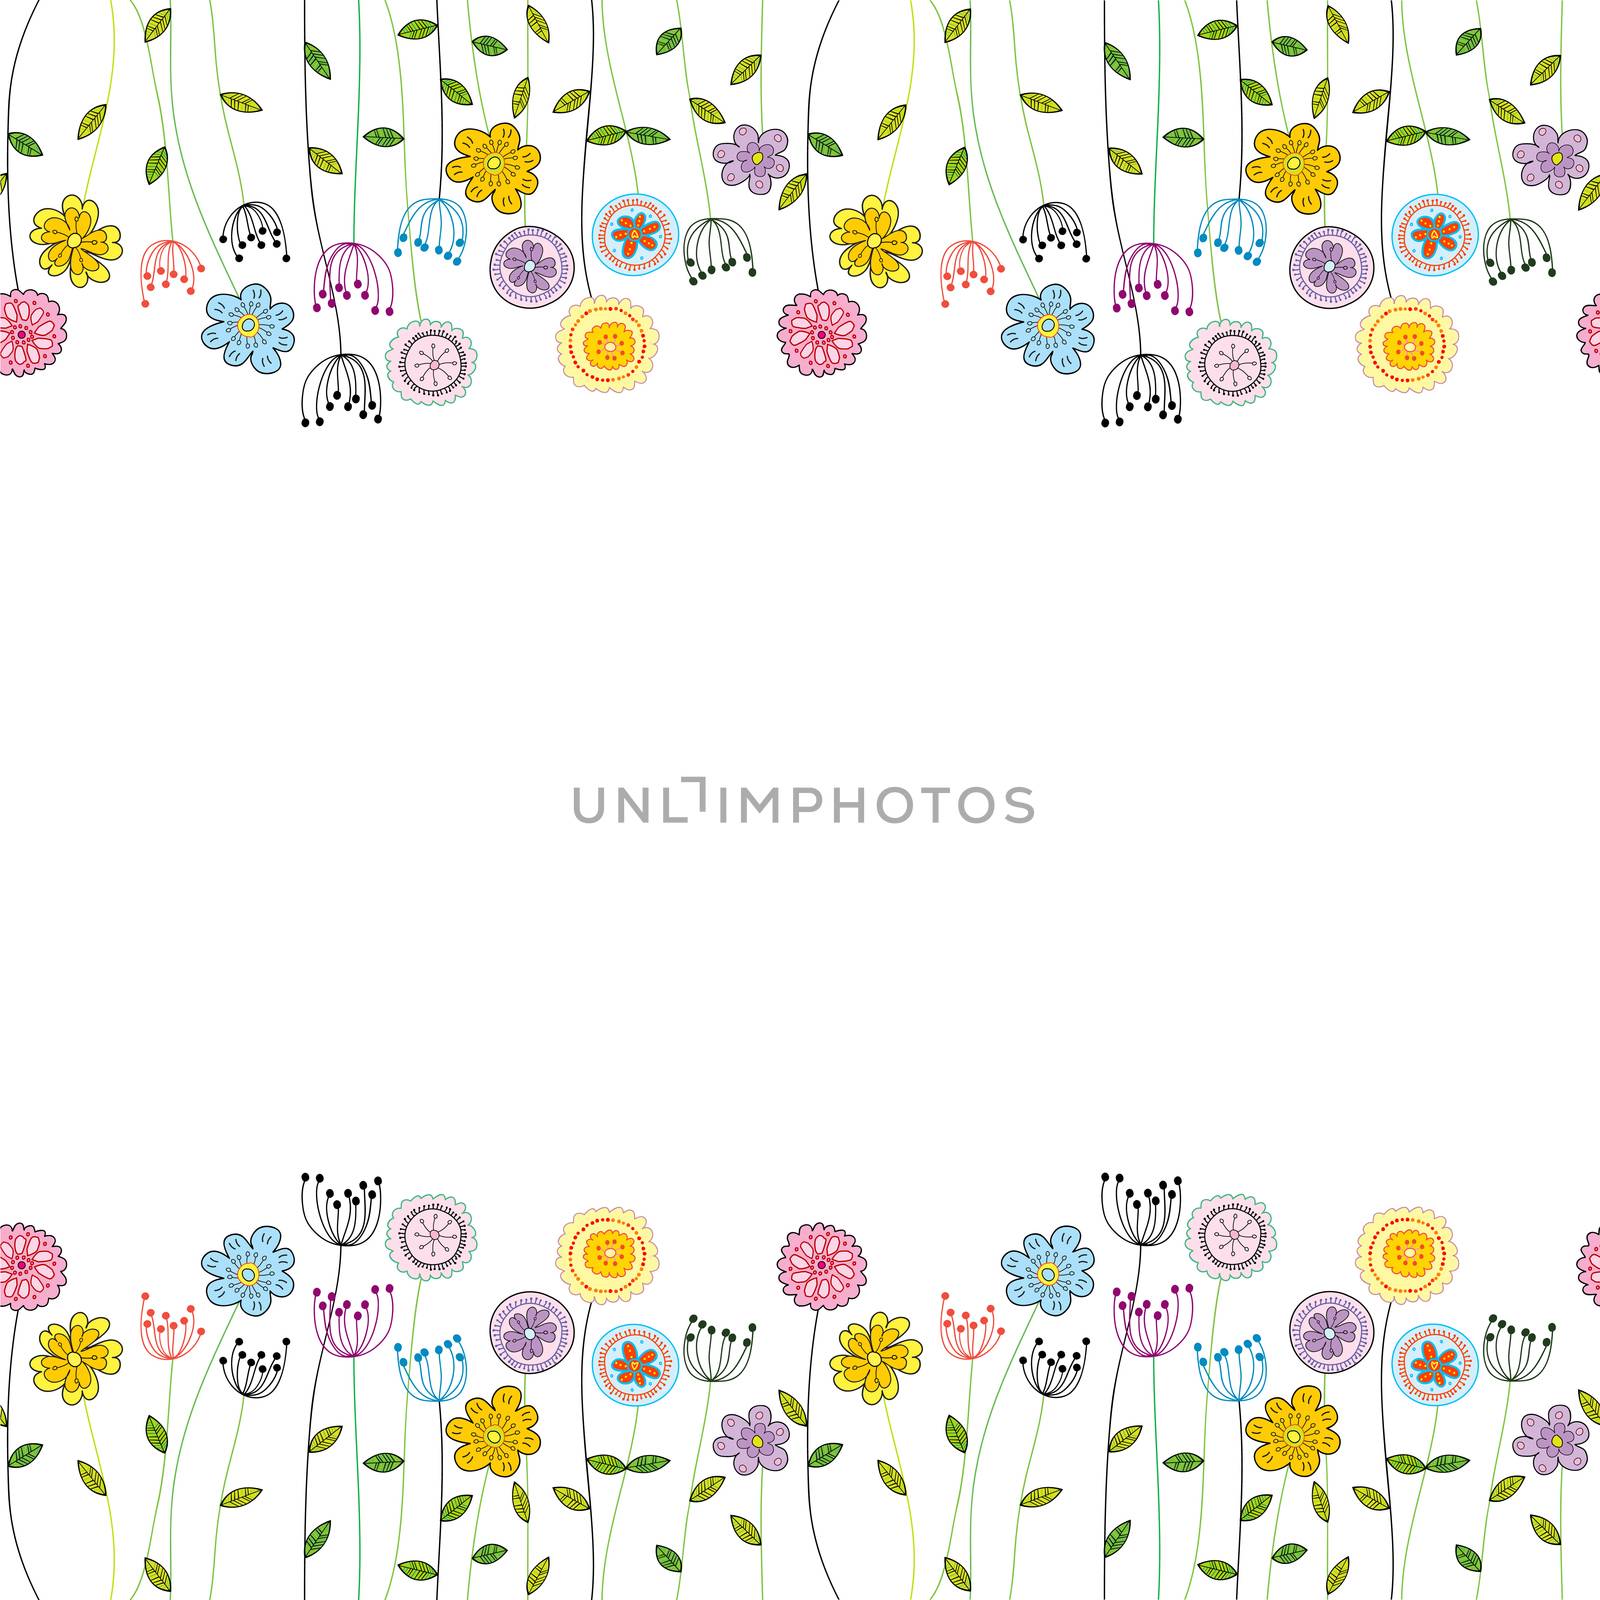 Seamless funny floral border with doodle colored flowers